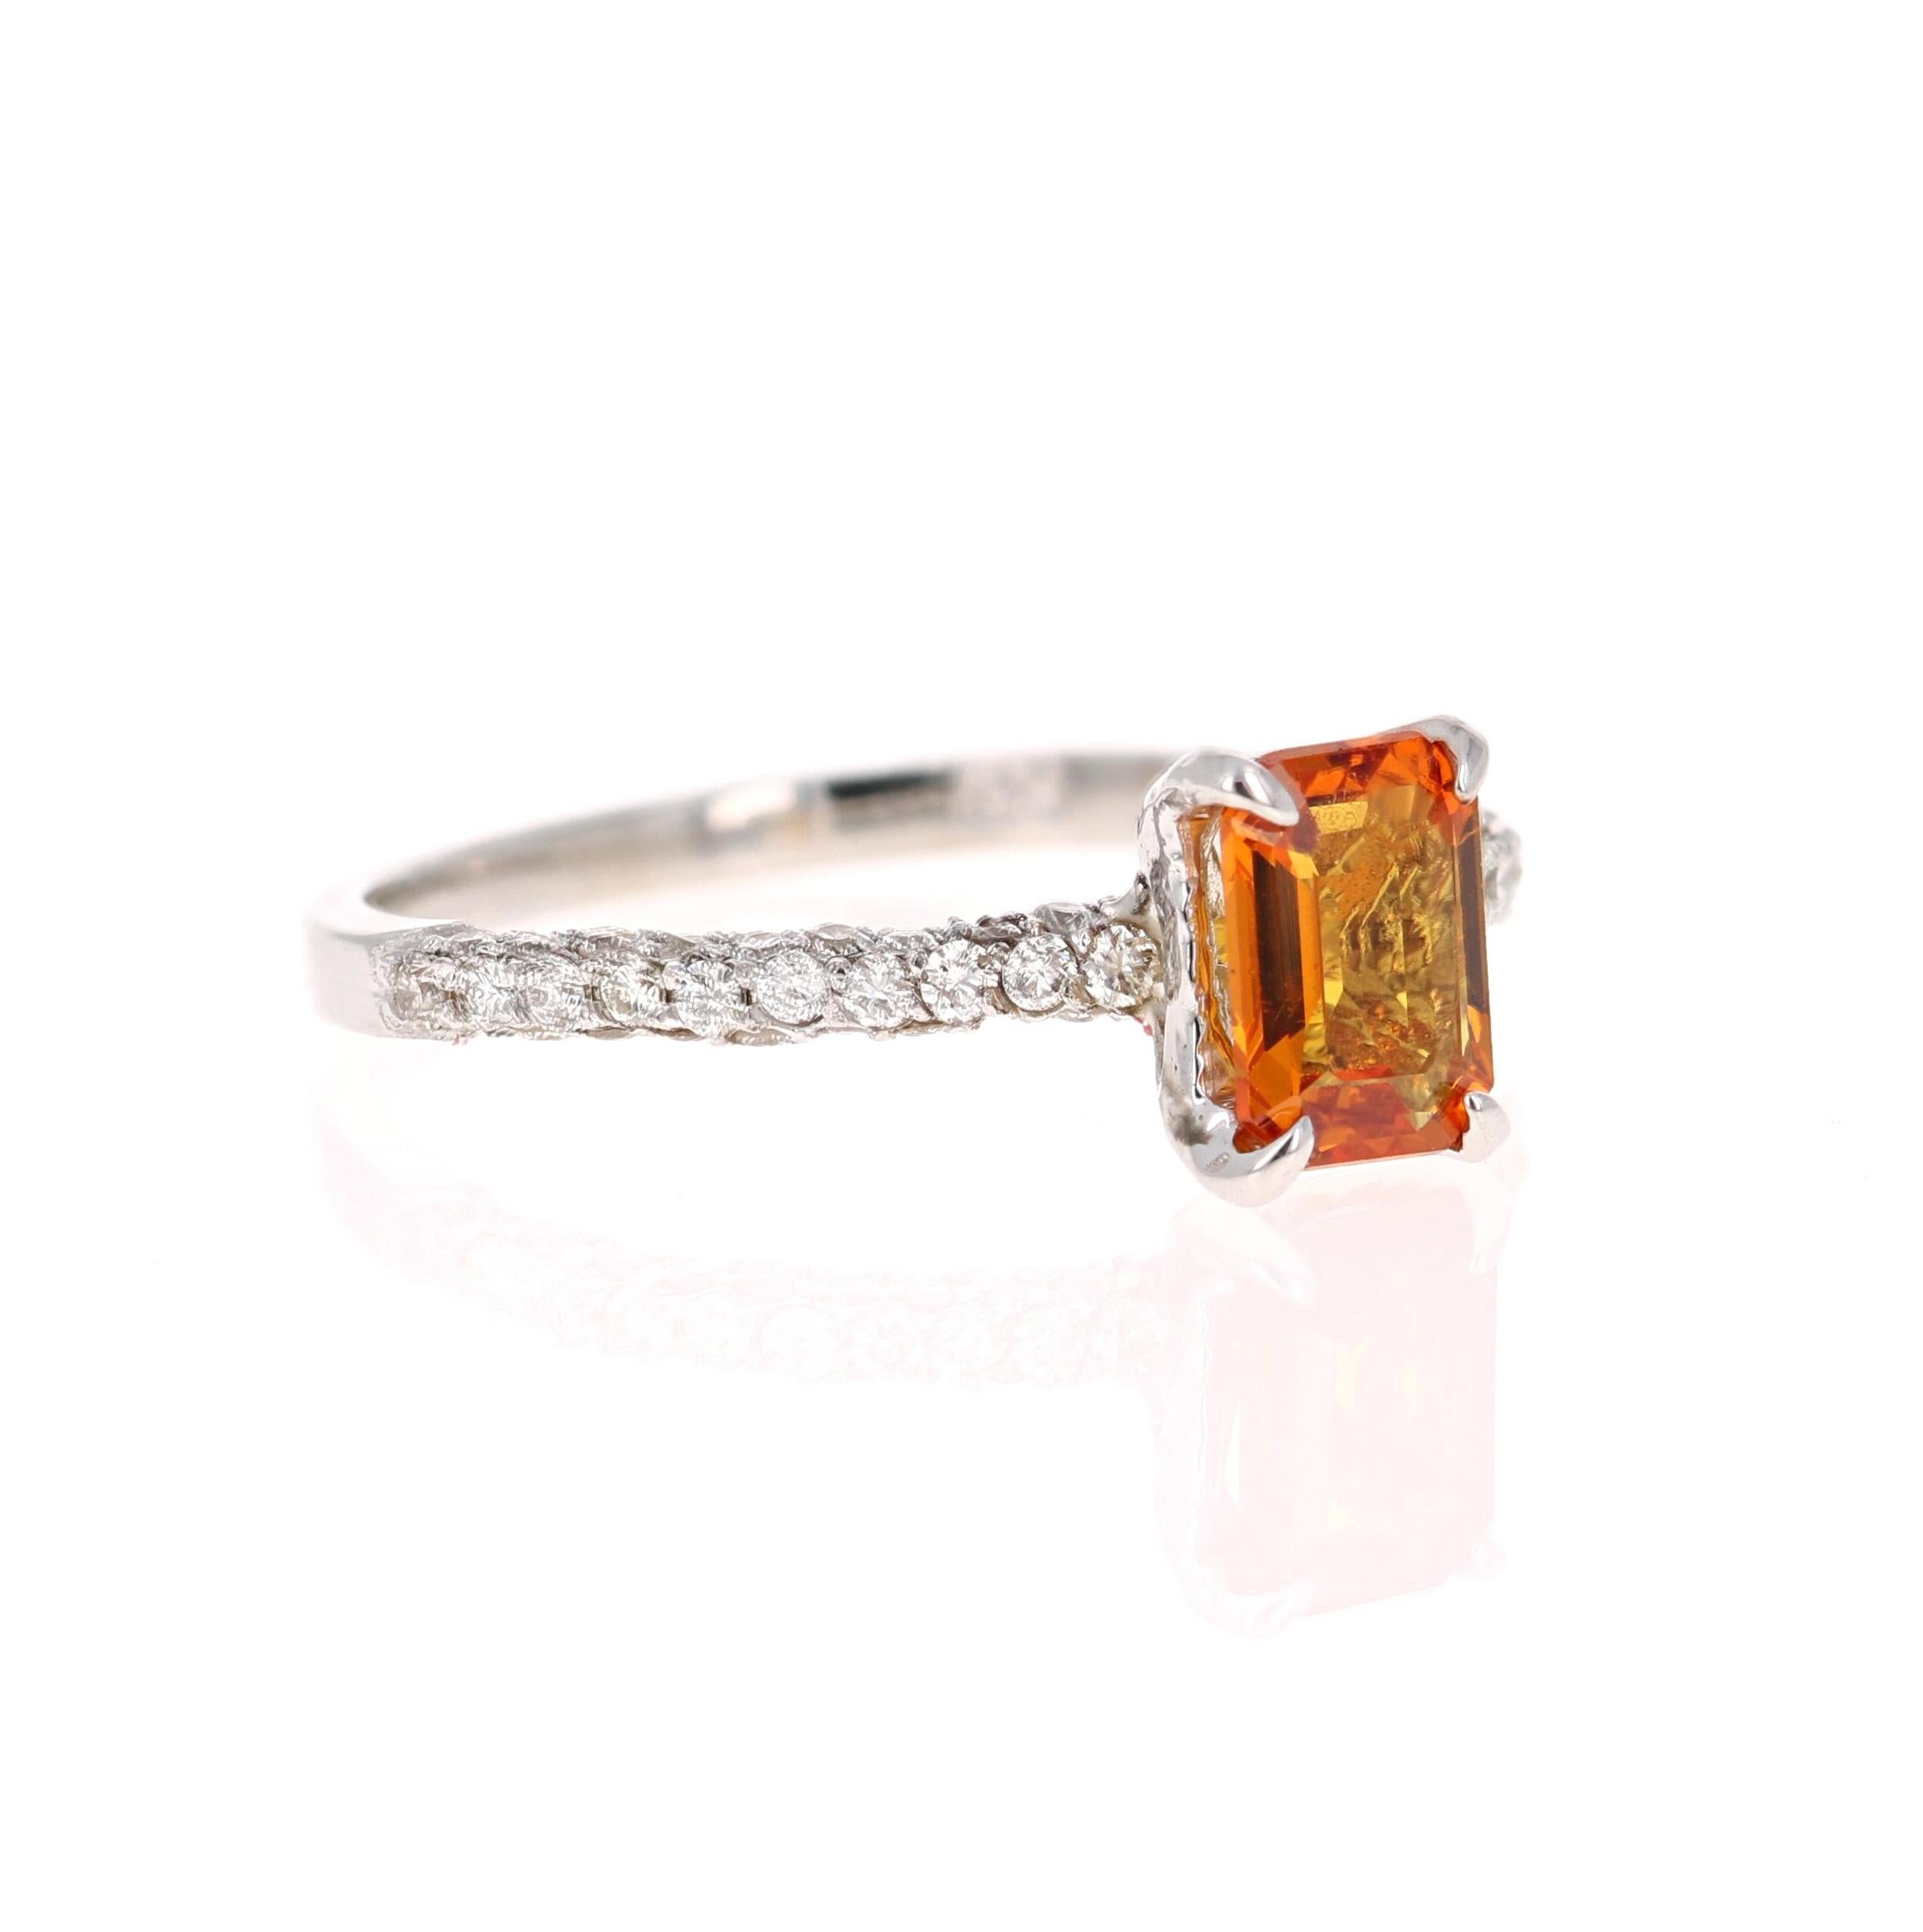 This beautiful ring has Natural Emerald Cut Orange Sapphire that weighs 1.04 Carats and is surrounded 54 Round Cut Diamonds that weigh 0.46 Carats. The total carat weight of the ring is 1.50 Carats. 

The ring is beautifully set in a classic 14